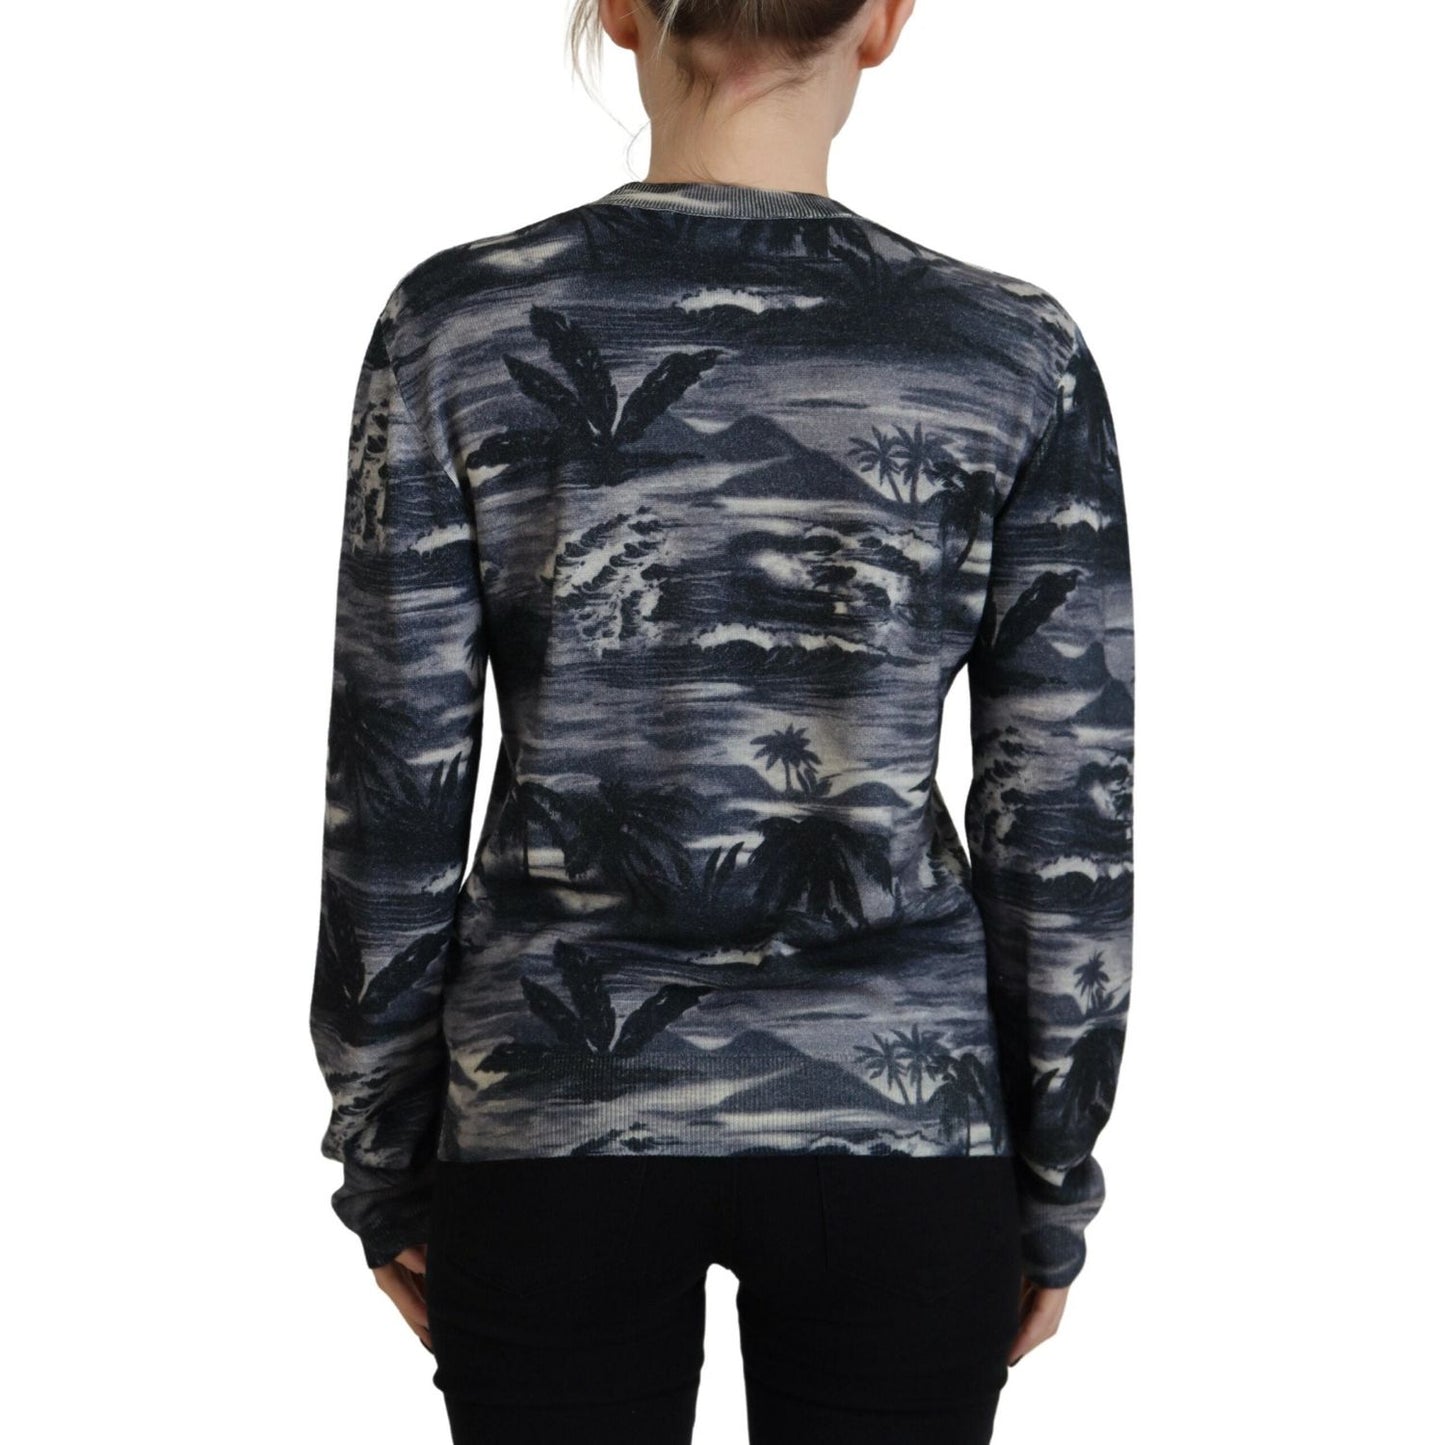 Dsquared² Black Long Sleeve Thunder Sky Print Casual Sweater black-long-sleeve-thunder-sky-print-casual-sweater